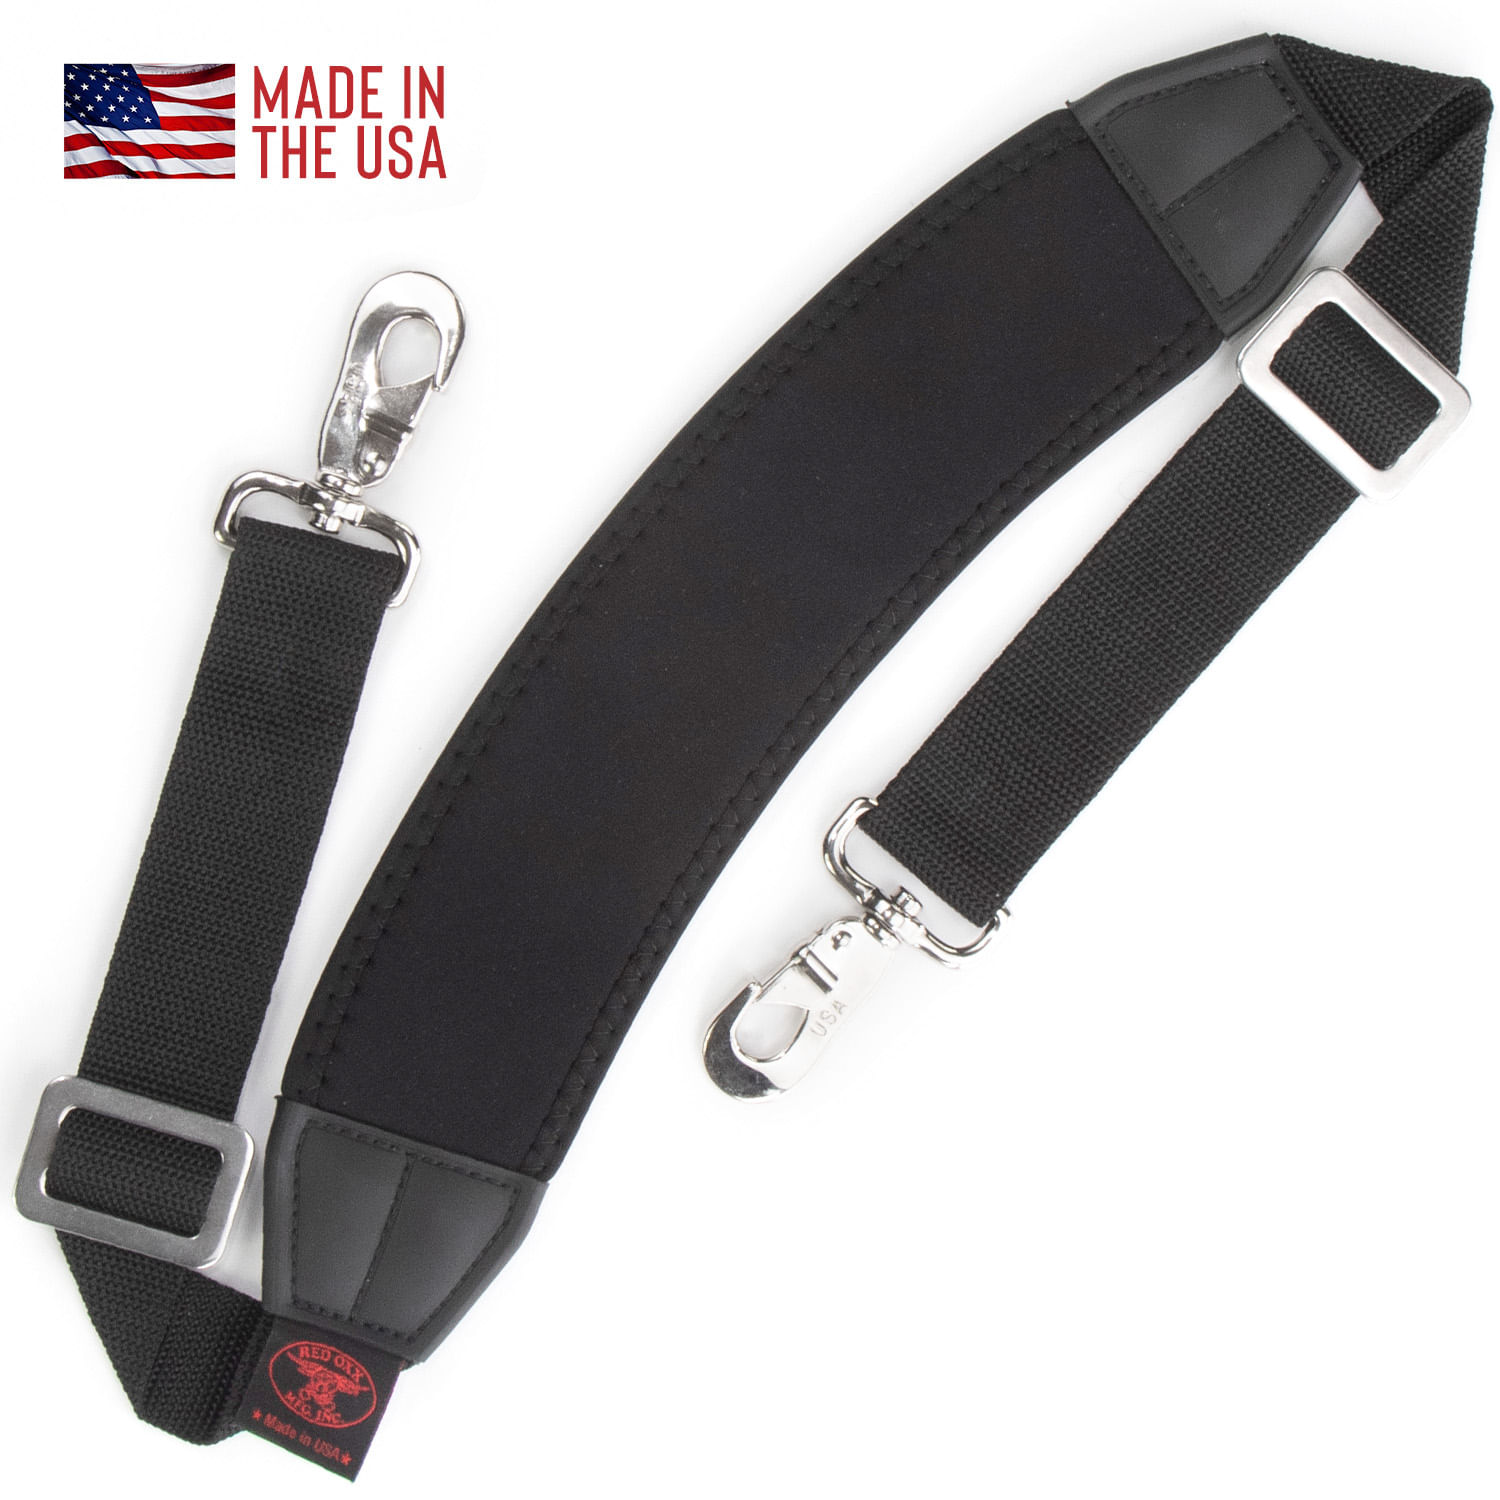 External Luggage Compression Strap by Red Oxx Mfg. Under $9.00